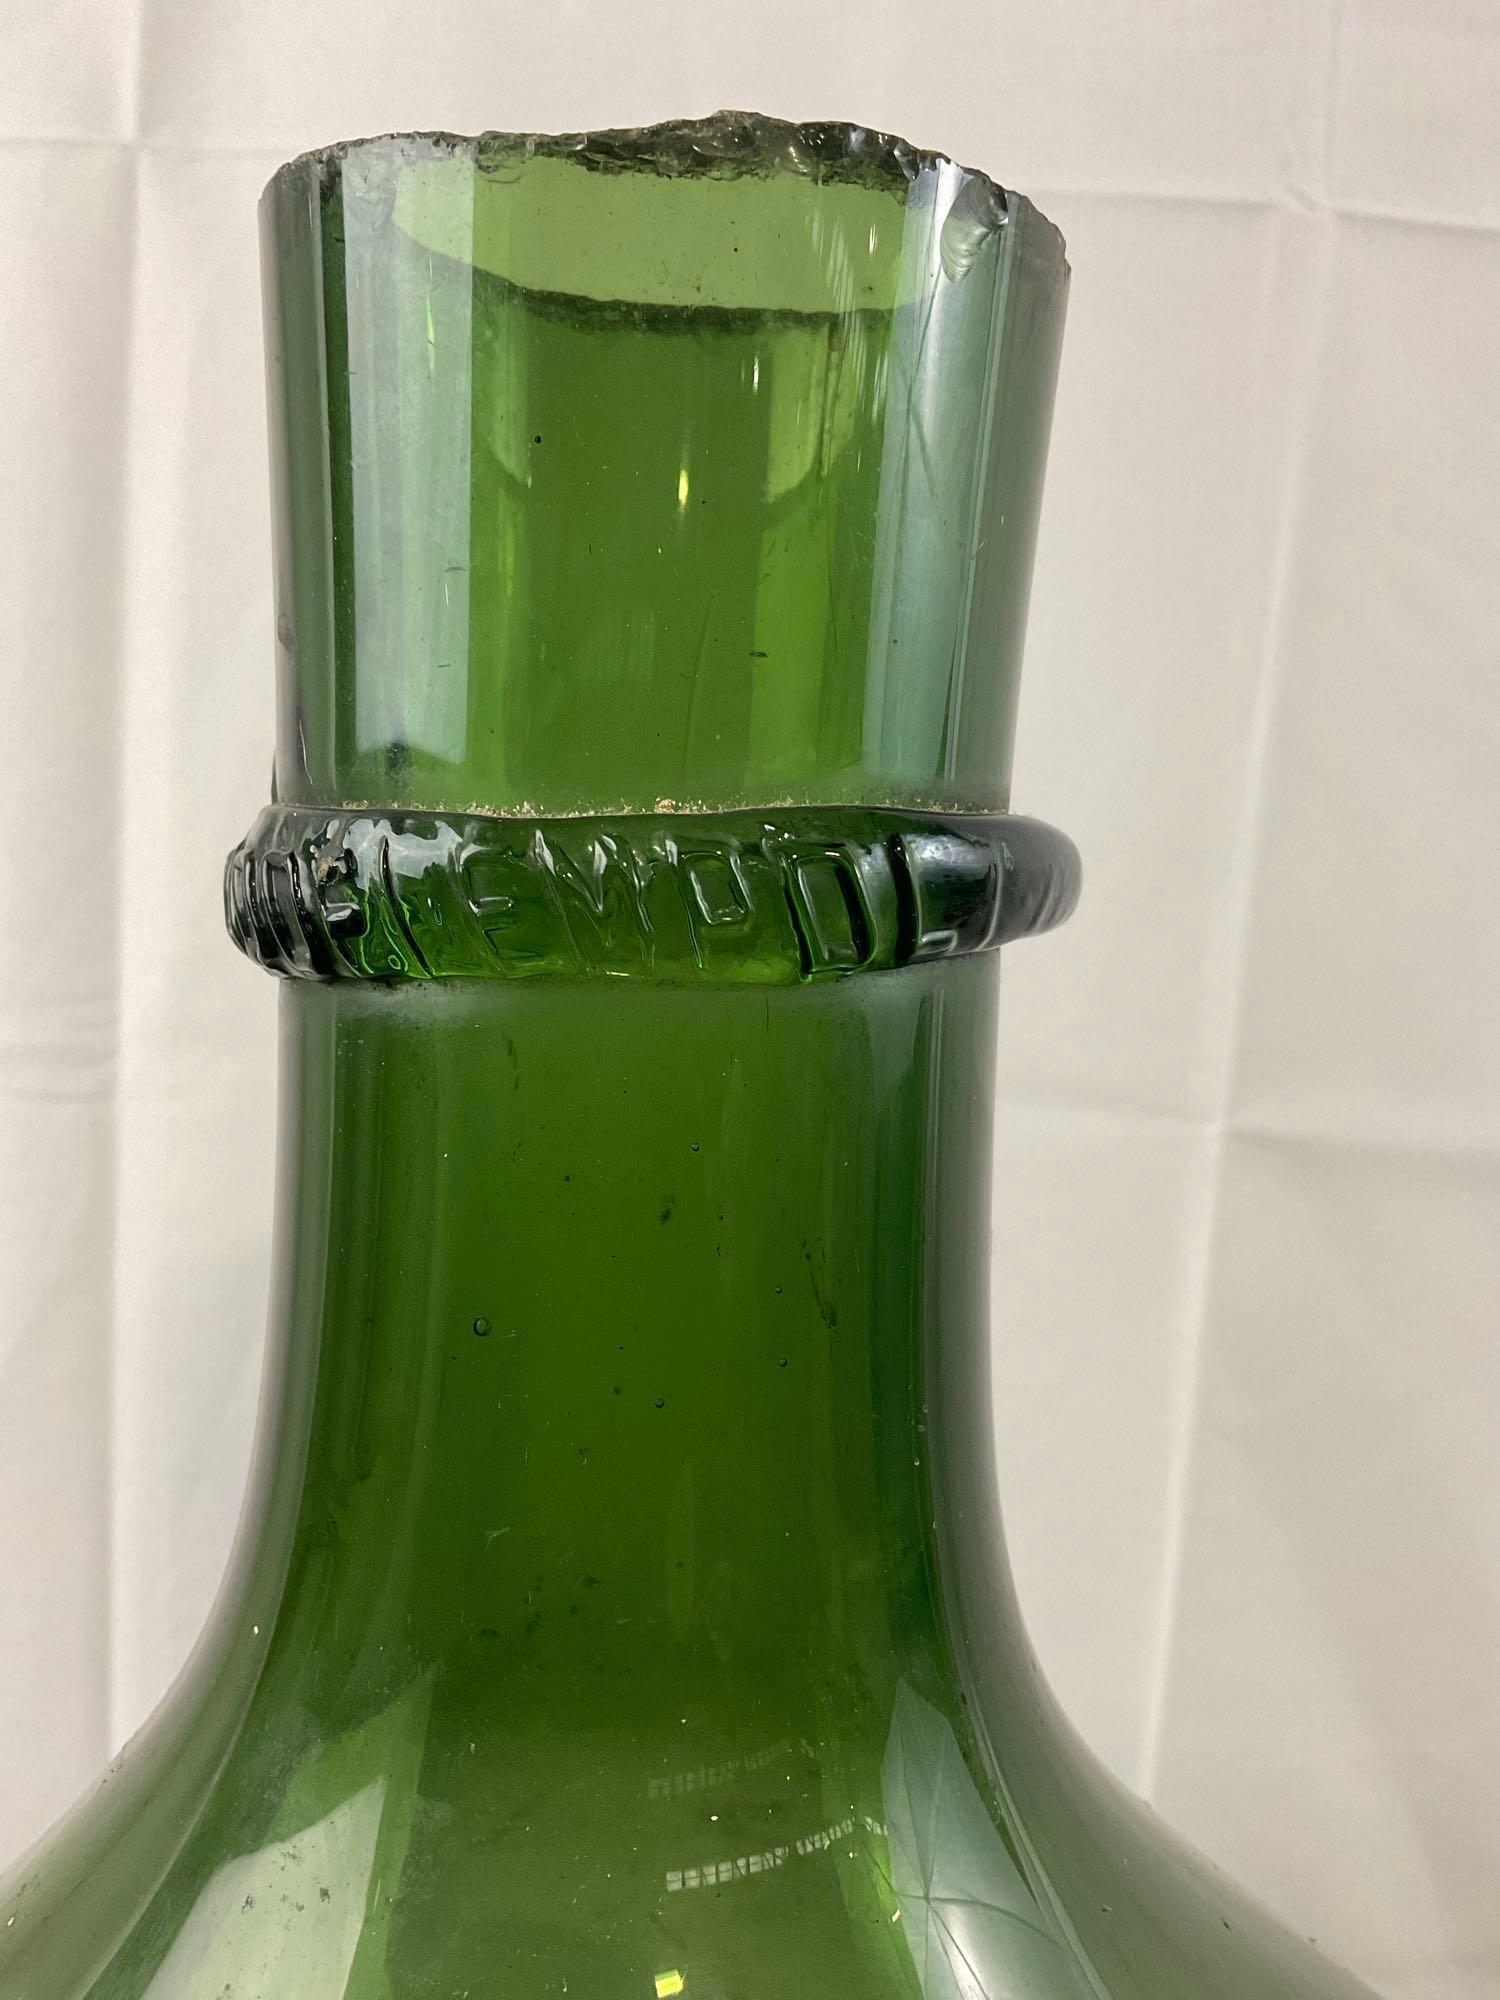 Massive Japanese Blown Glass Float, Light Green in color, some wear